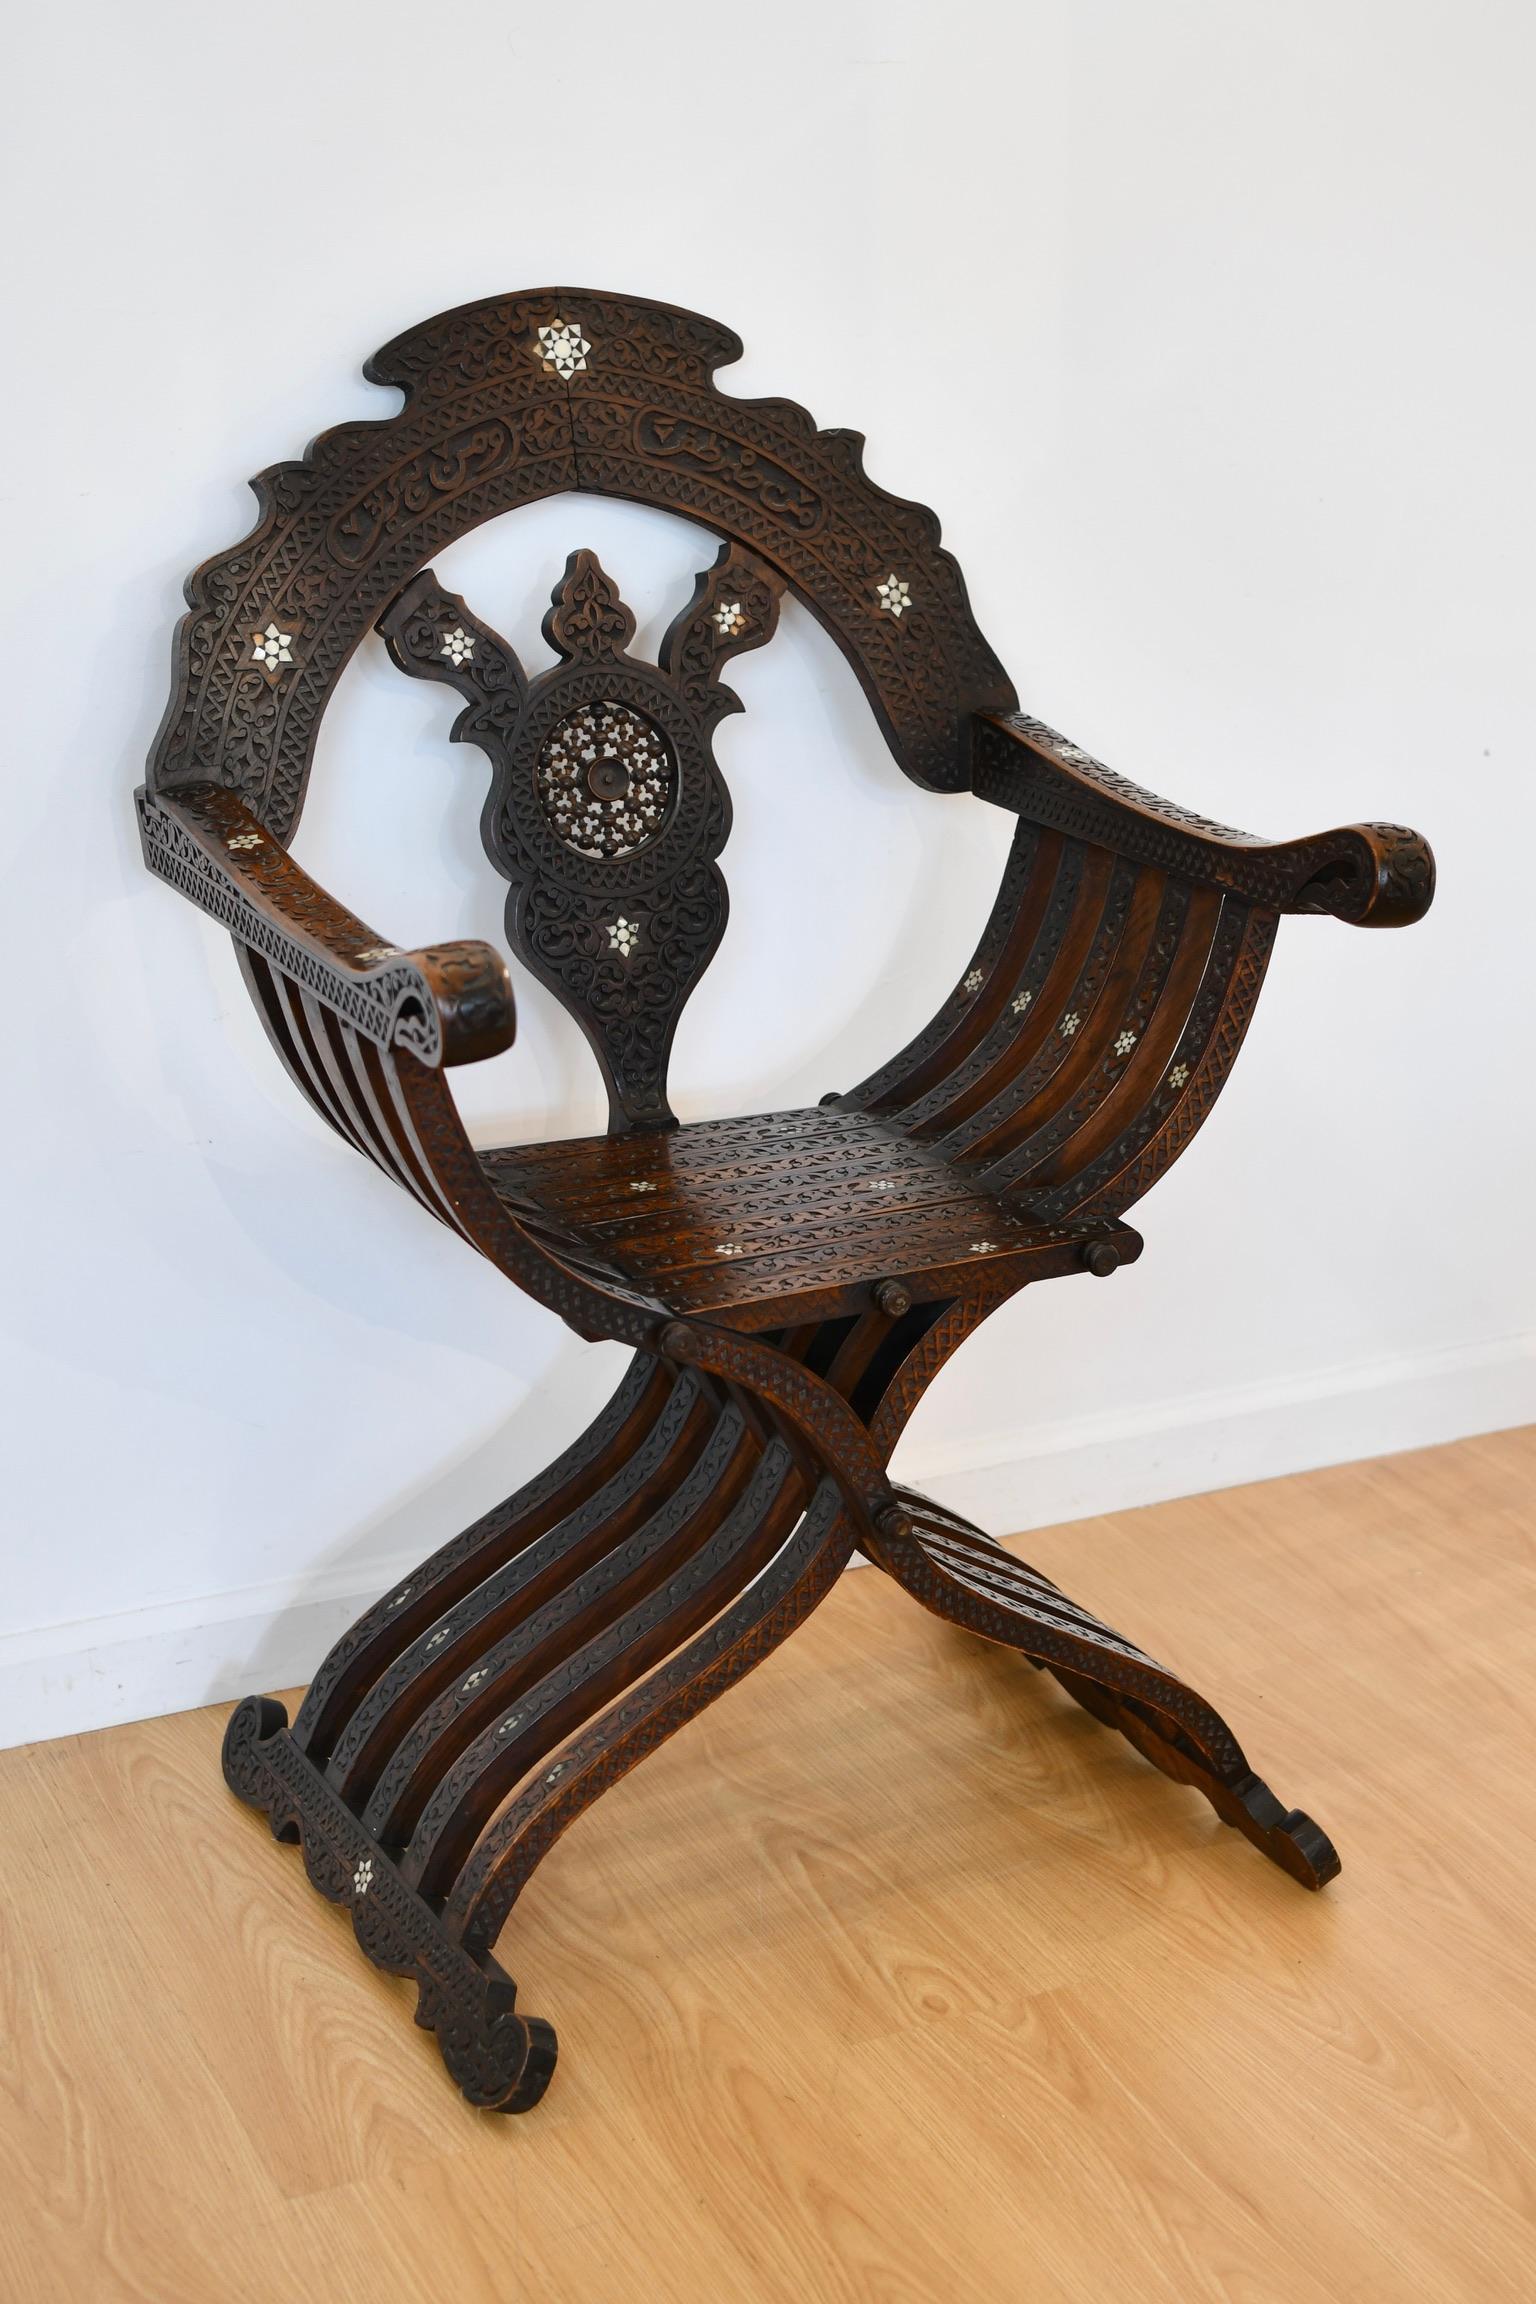 Carved Moroccan Savonarola Armchair With Arabic Caligraphy For Sale